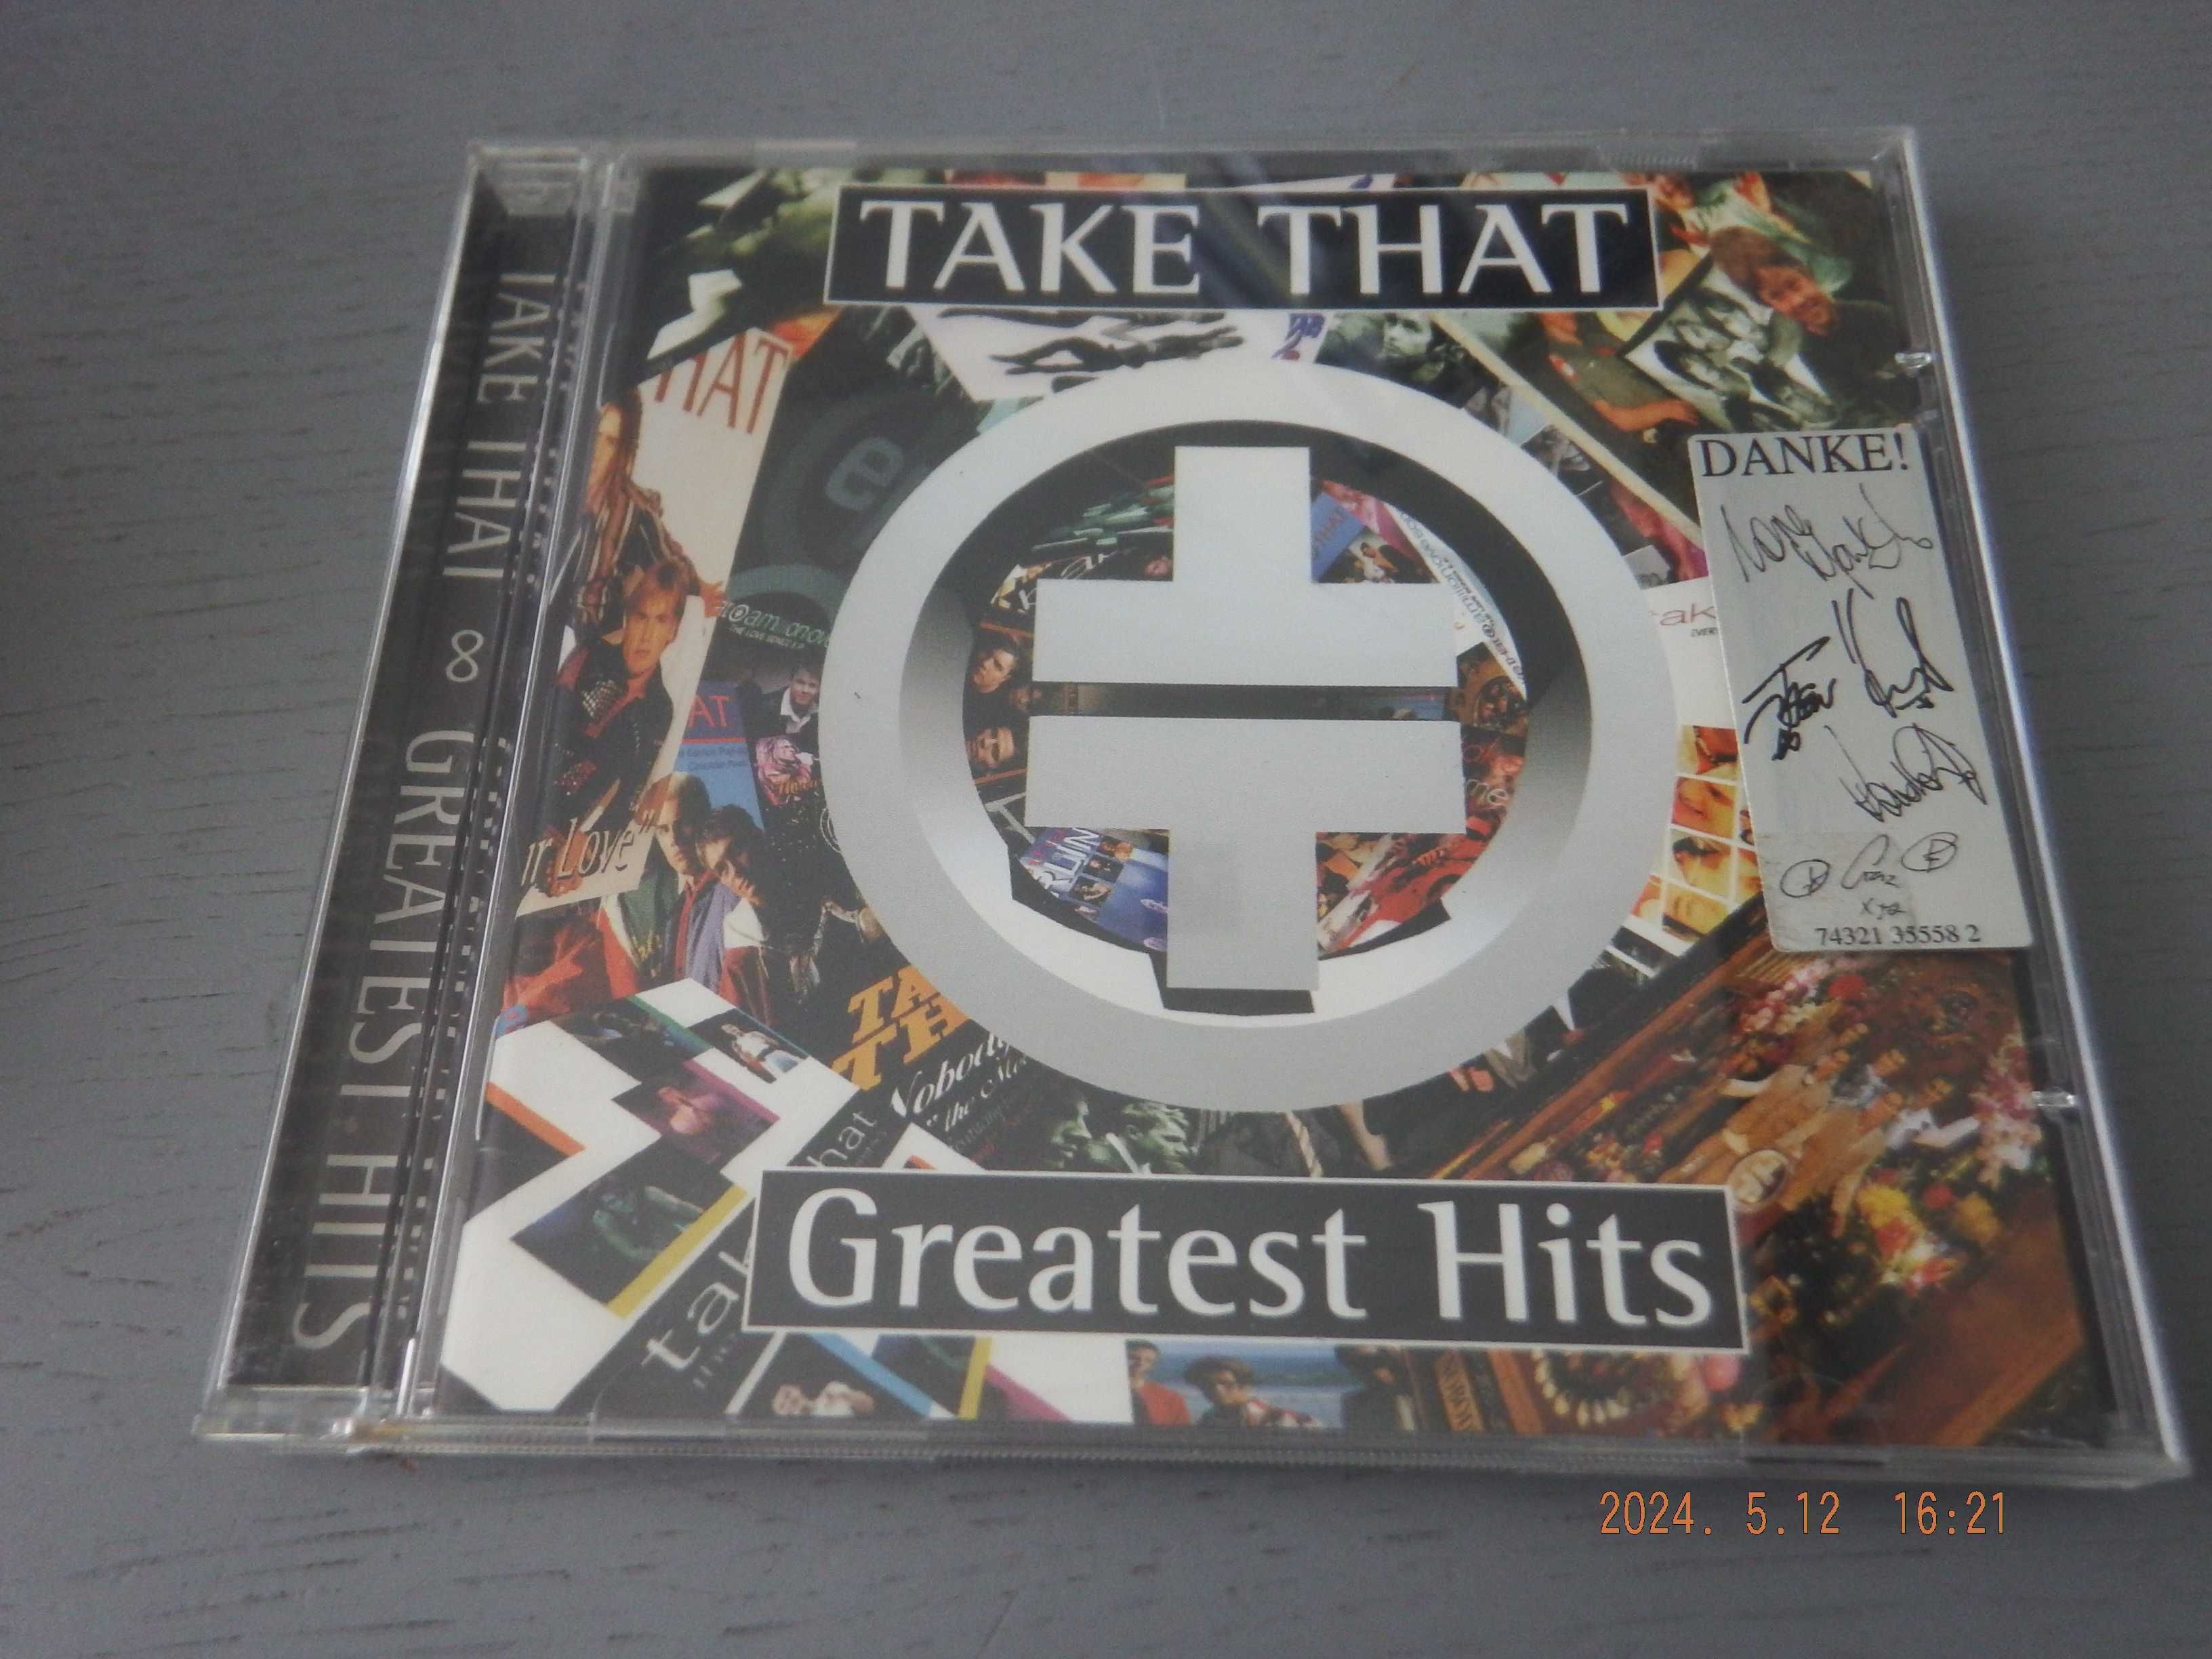 TAKE THAT - Greatest hits